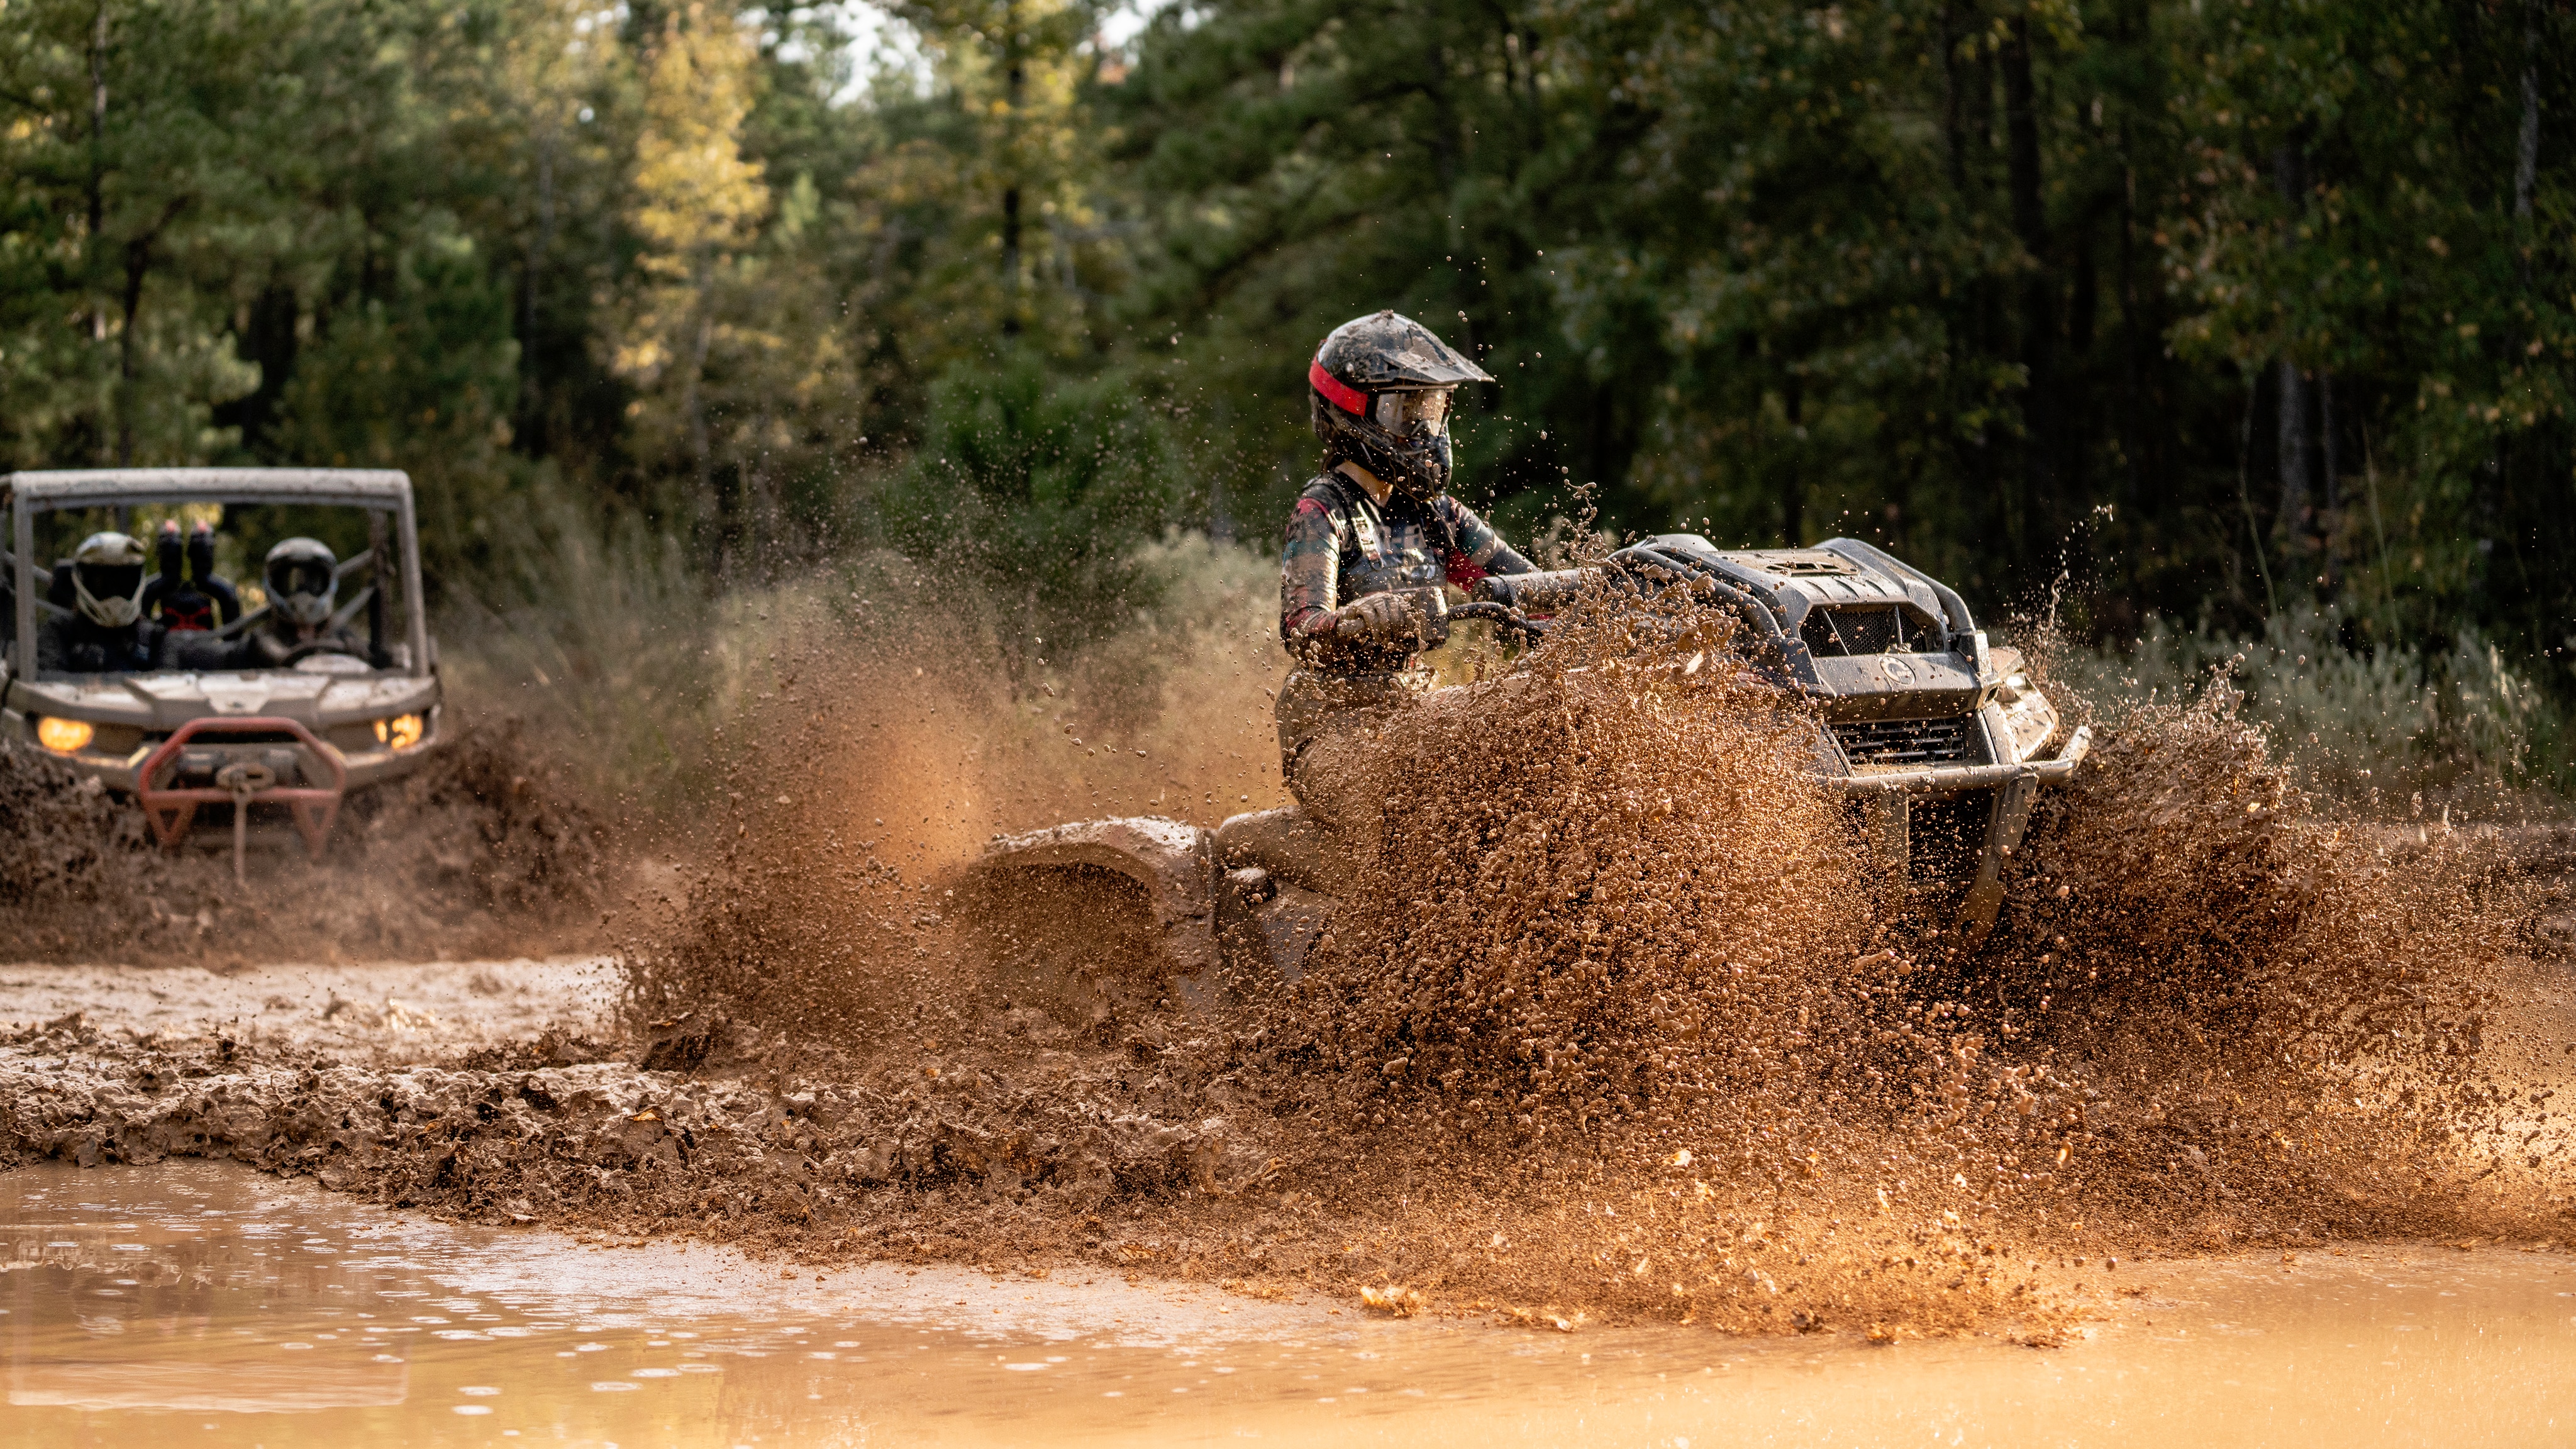 An ATV and a side-by-side in the mud